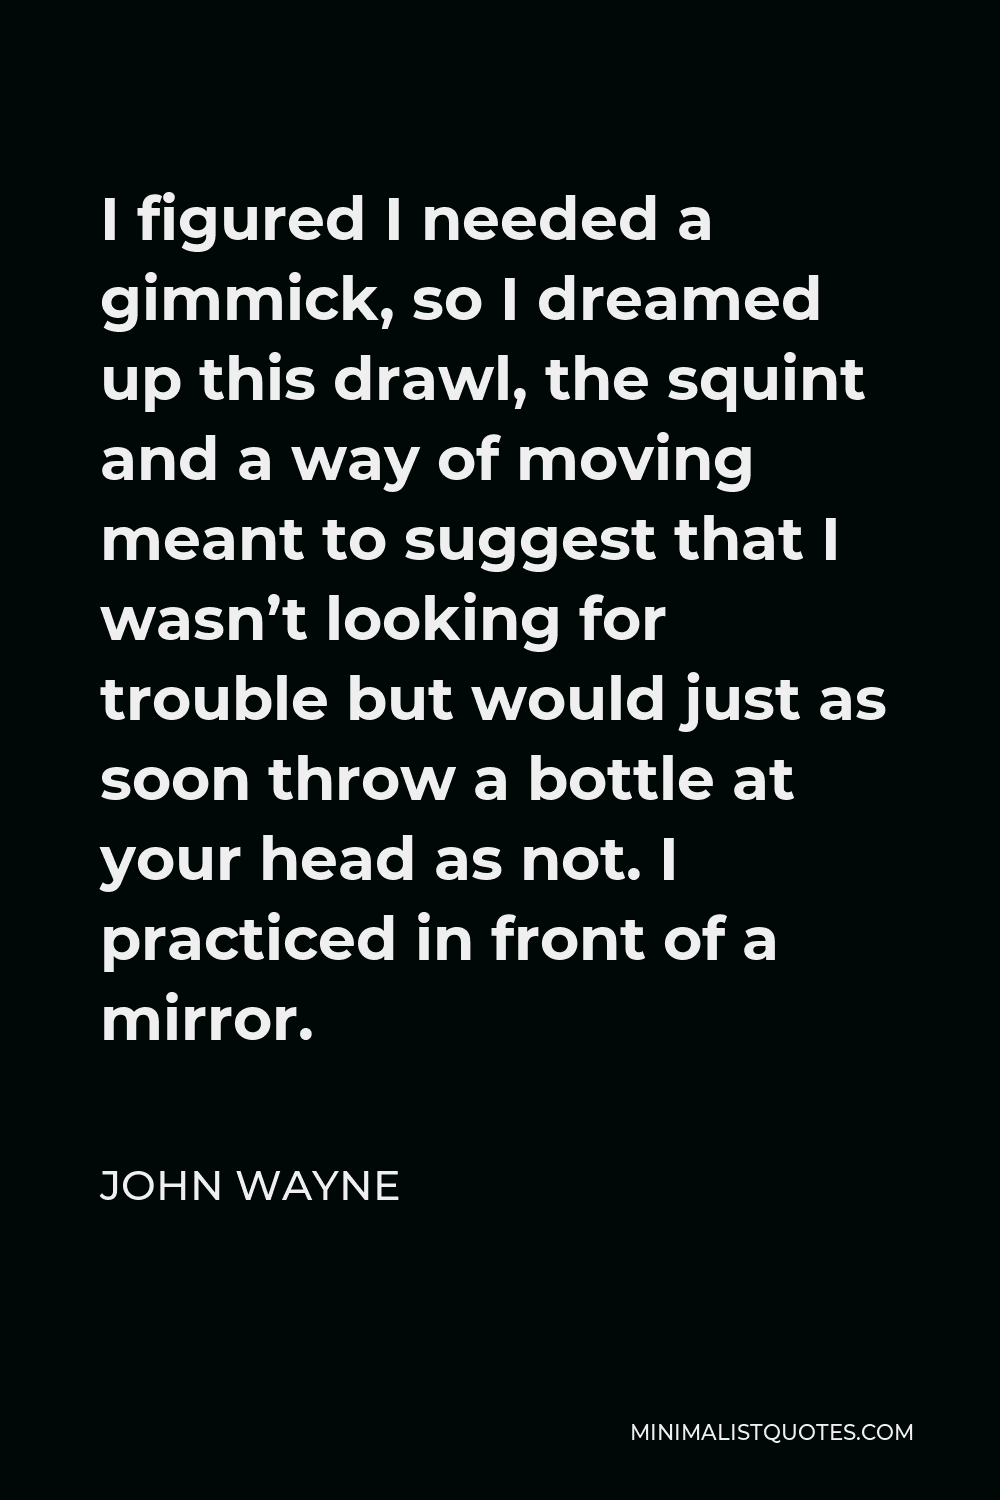 John Wayne Quote - I figured I needed a gimmick, so I dreamed up this drawl, the squint and a way of moving meant to suggest that I wasn’t looking for trouble but would just as soon throw a bottle at your head as not. I practiced in front of a mirror.